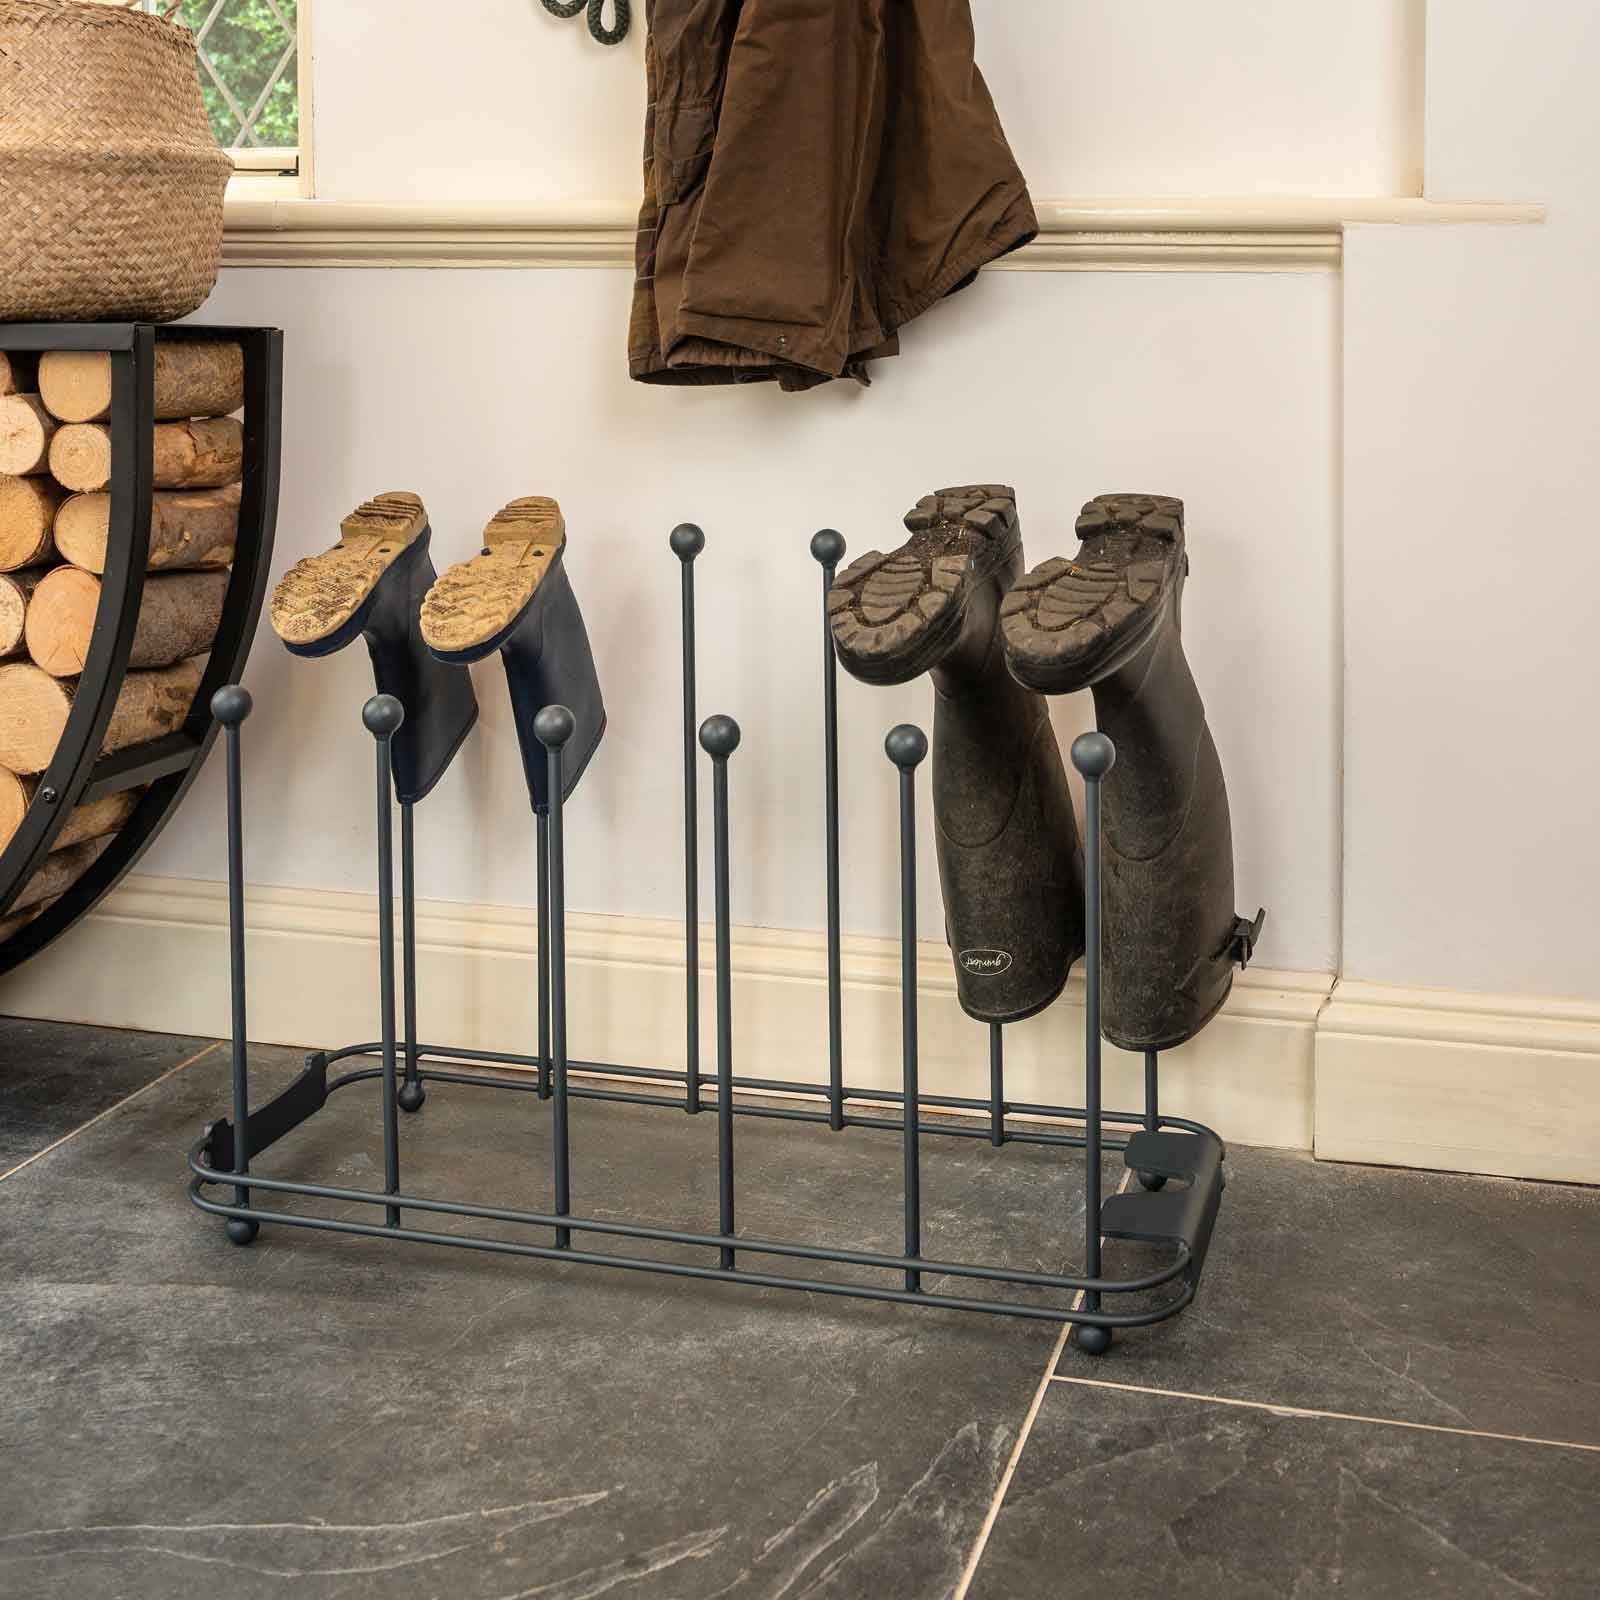 https://www.harrodhorticultural.com/uploads/images/products/HOM-004_Welly_Boot_Rack_6_1.jpg